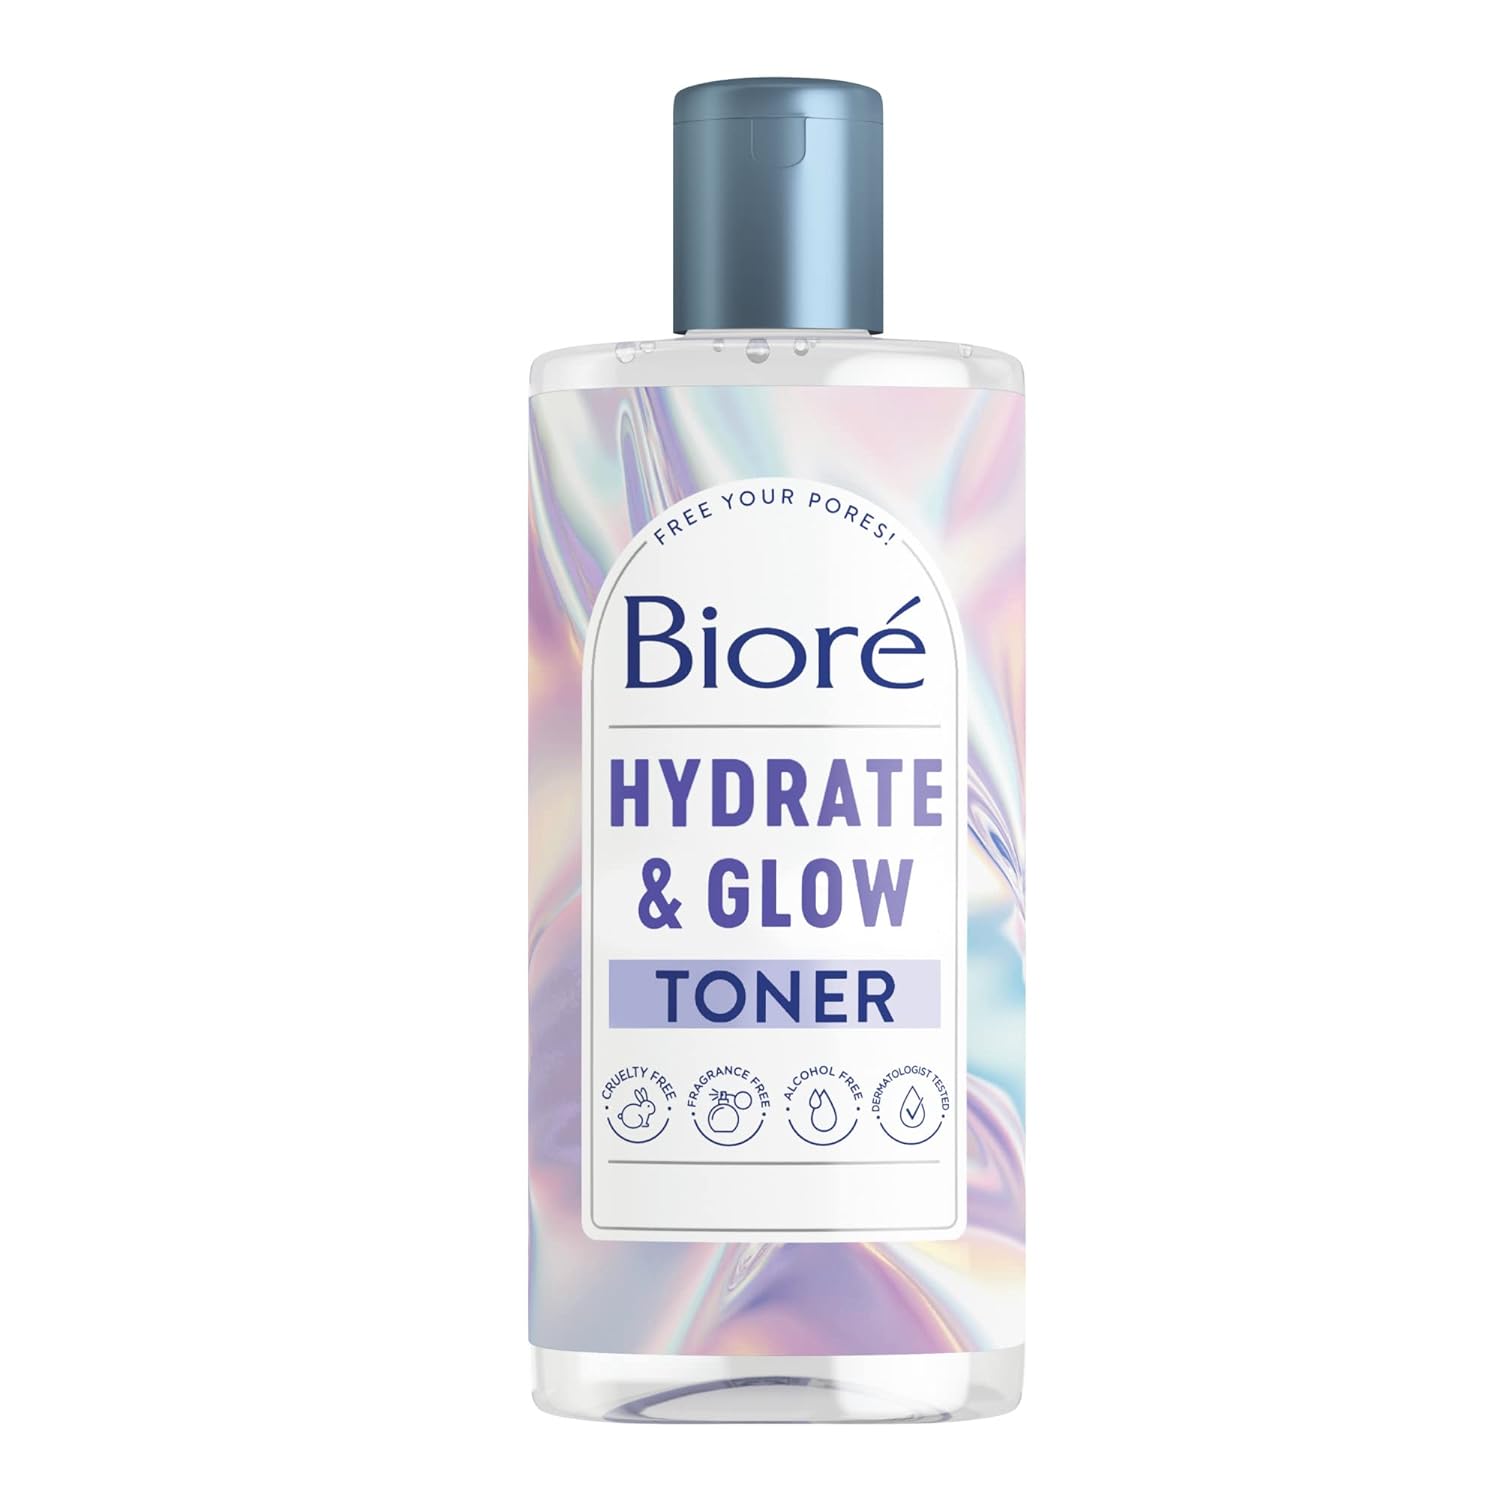 8-Ounce Biore Hydrate and Glow Face Toner $4.46, 6.77-Ounce Biore Deep Pore Charcoal Facial Cleanser $4.81, More w/ S&S = Free Shipping w/ Prime or on $35+